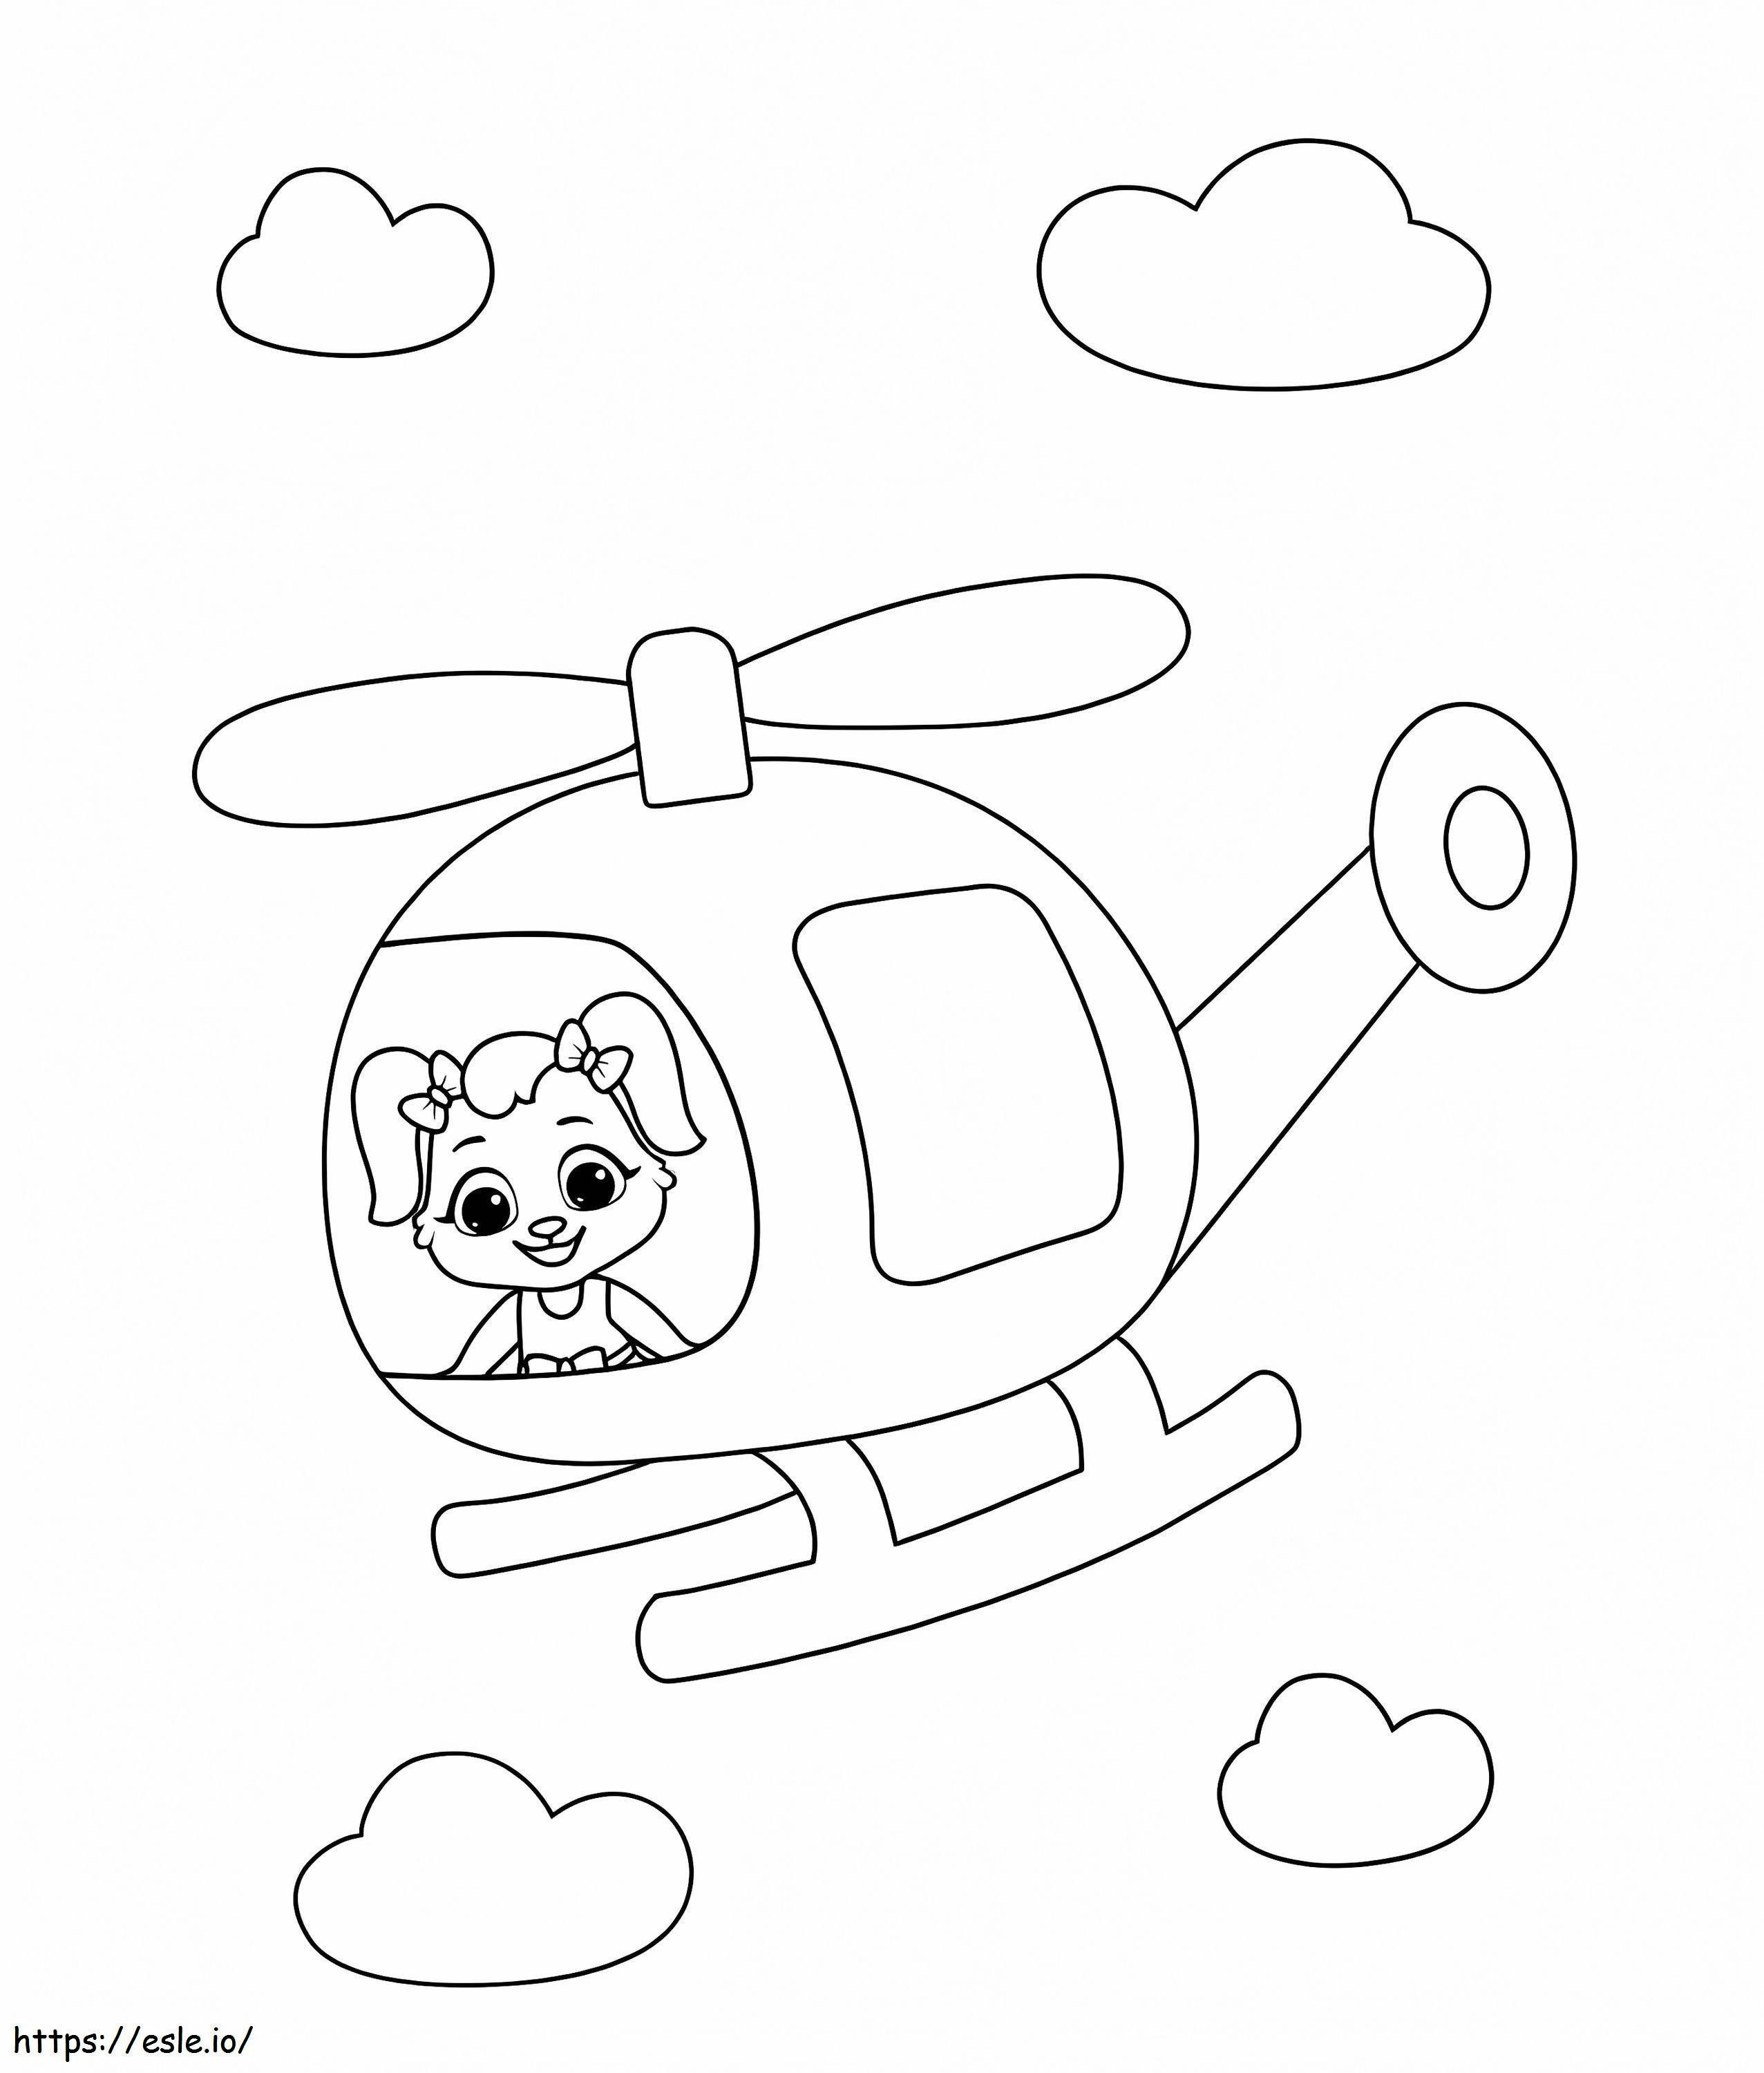 Dog In A Helicopter coloring page